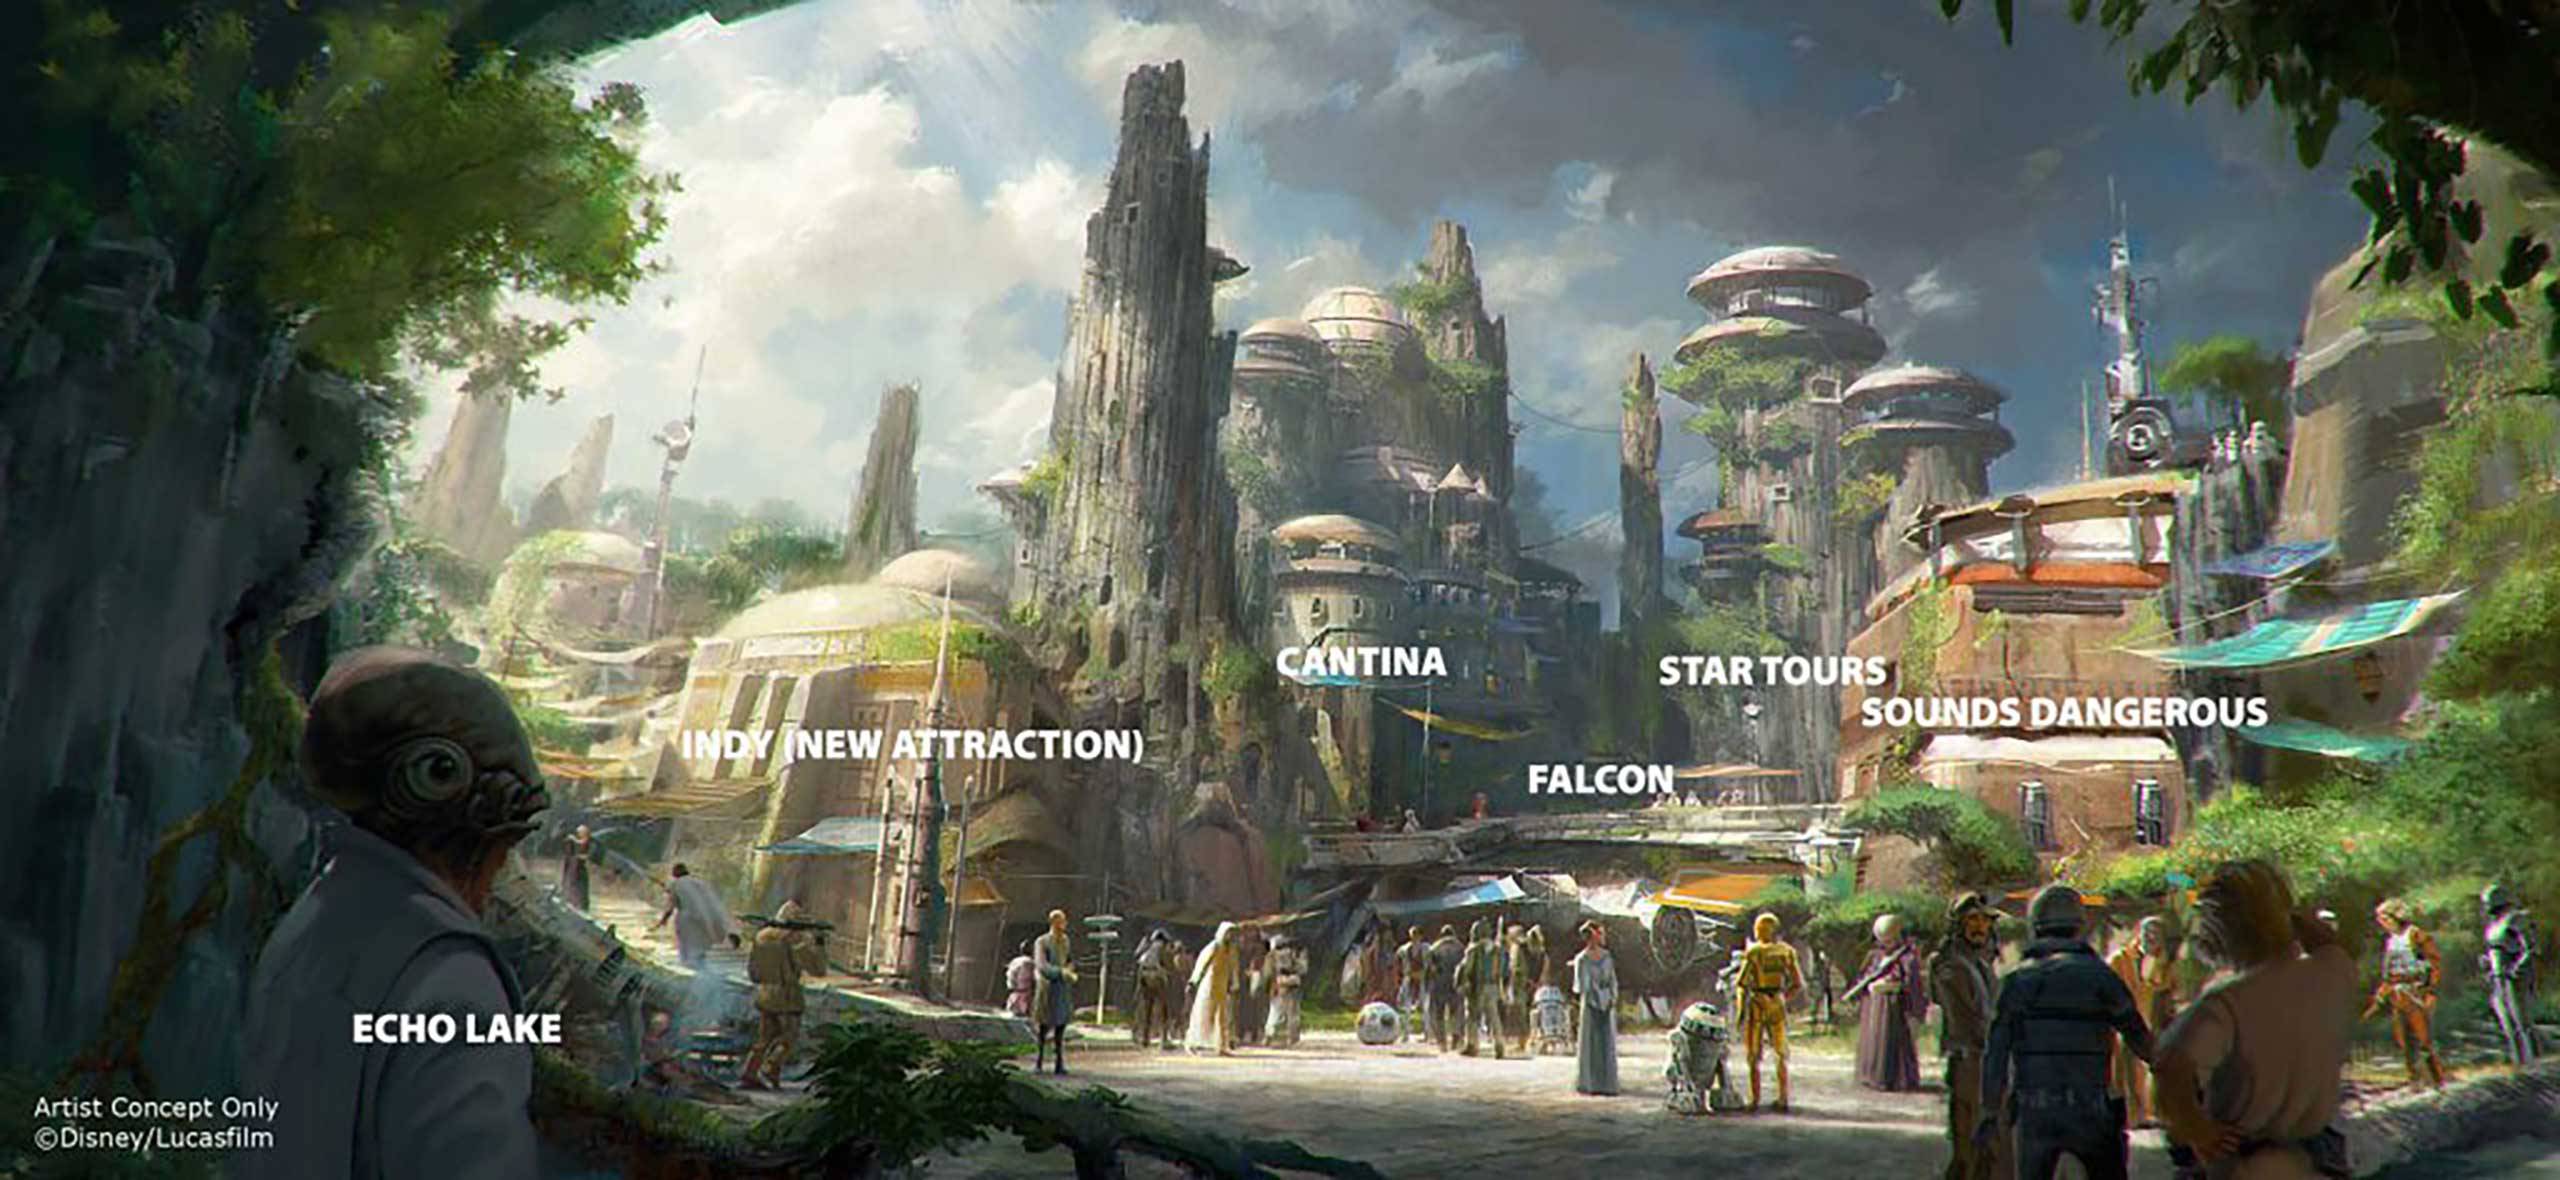 Possible attraction layout in Star Wars Land at Disney's Hollywood Studios. By Ignohippo.